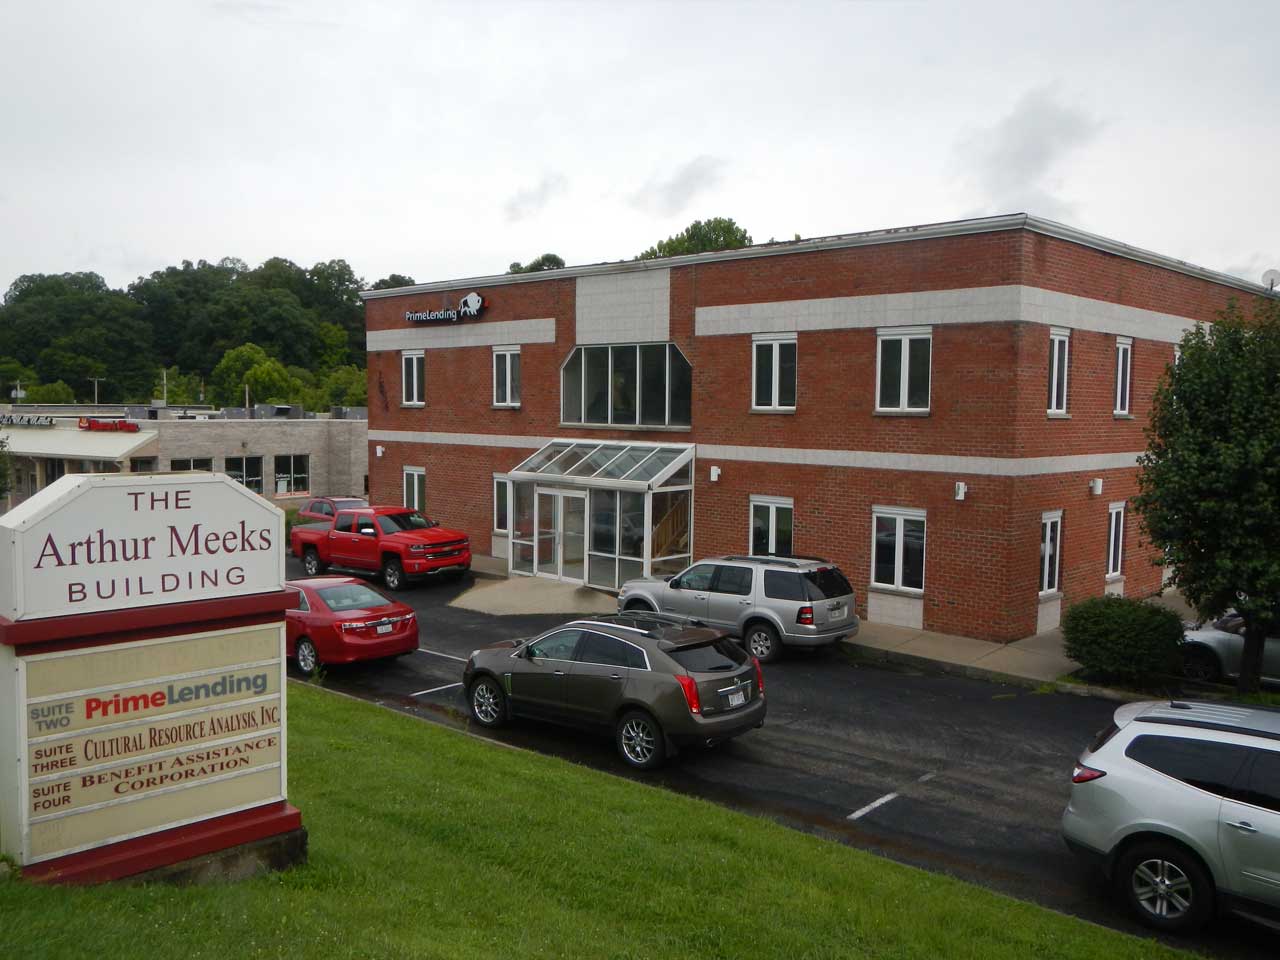 Location of West Virginia office, within a two-story brick building.